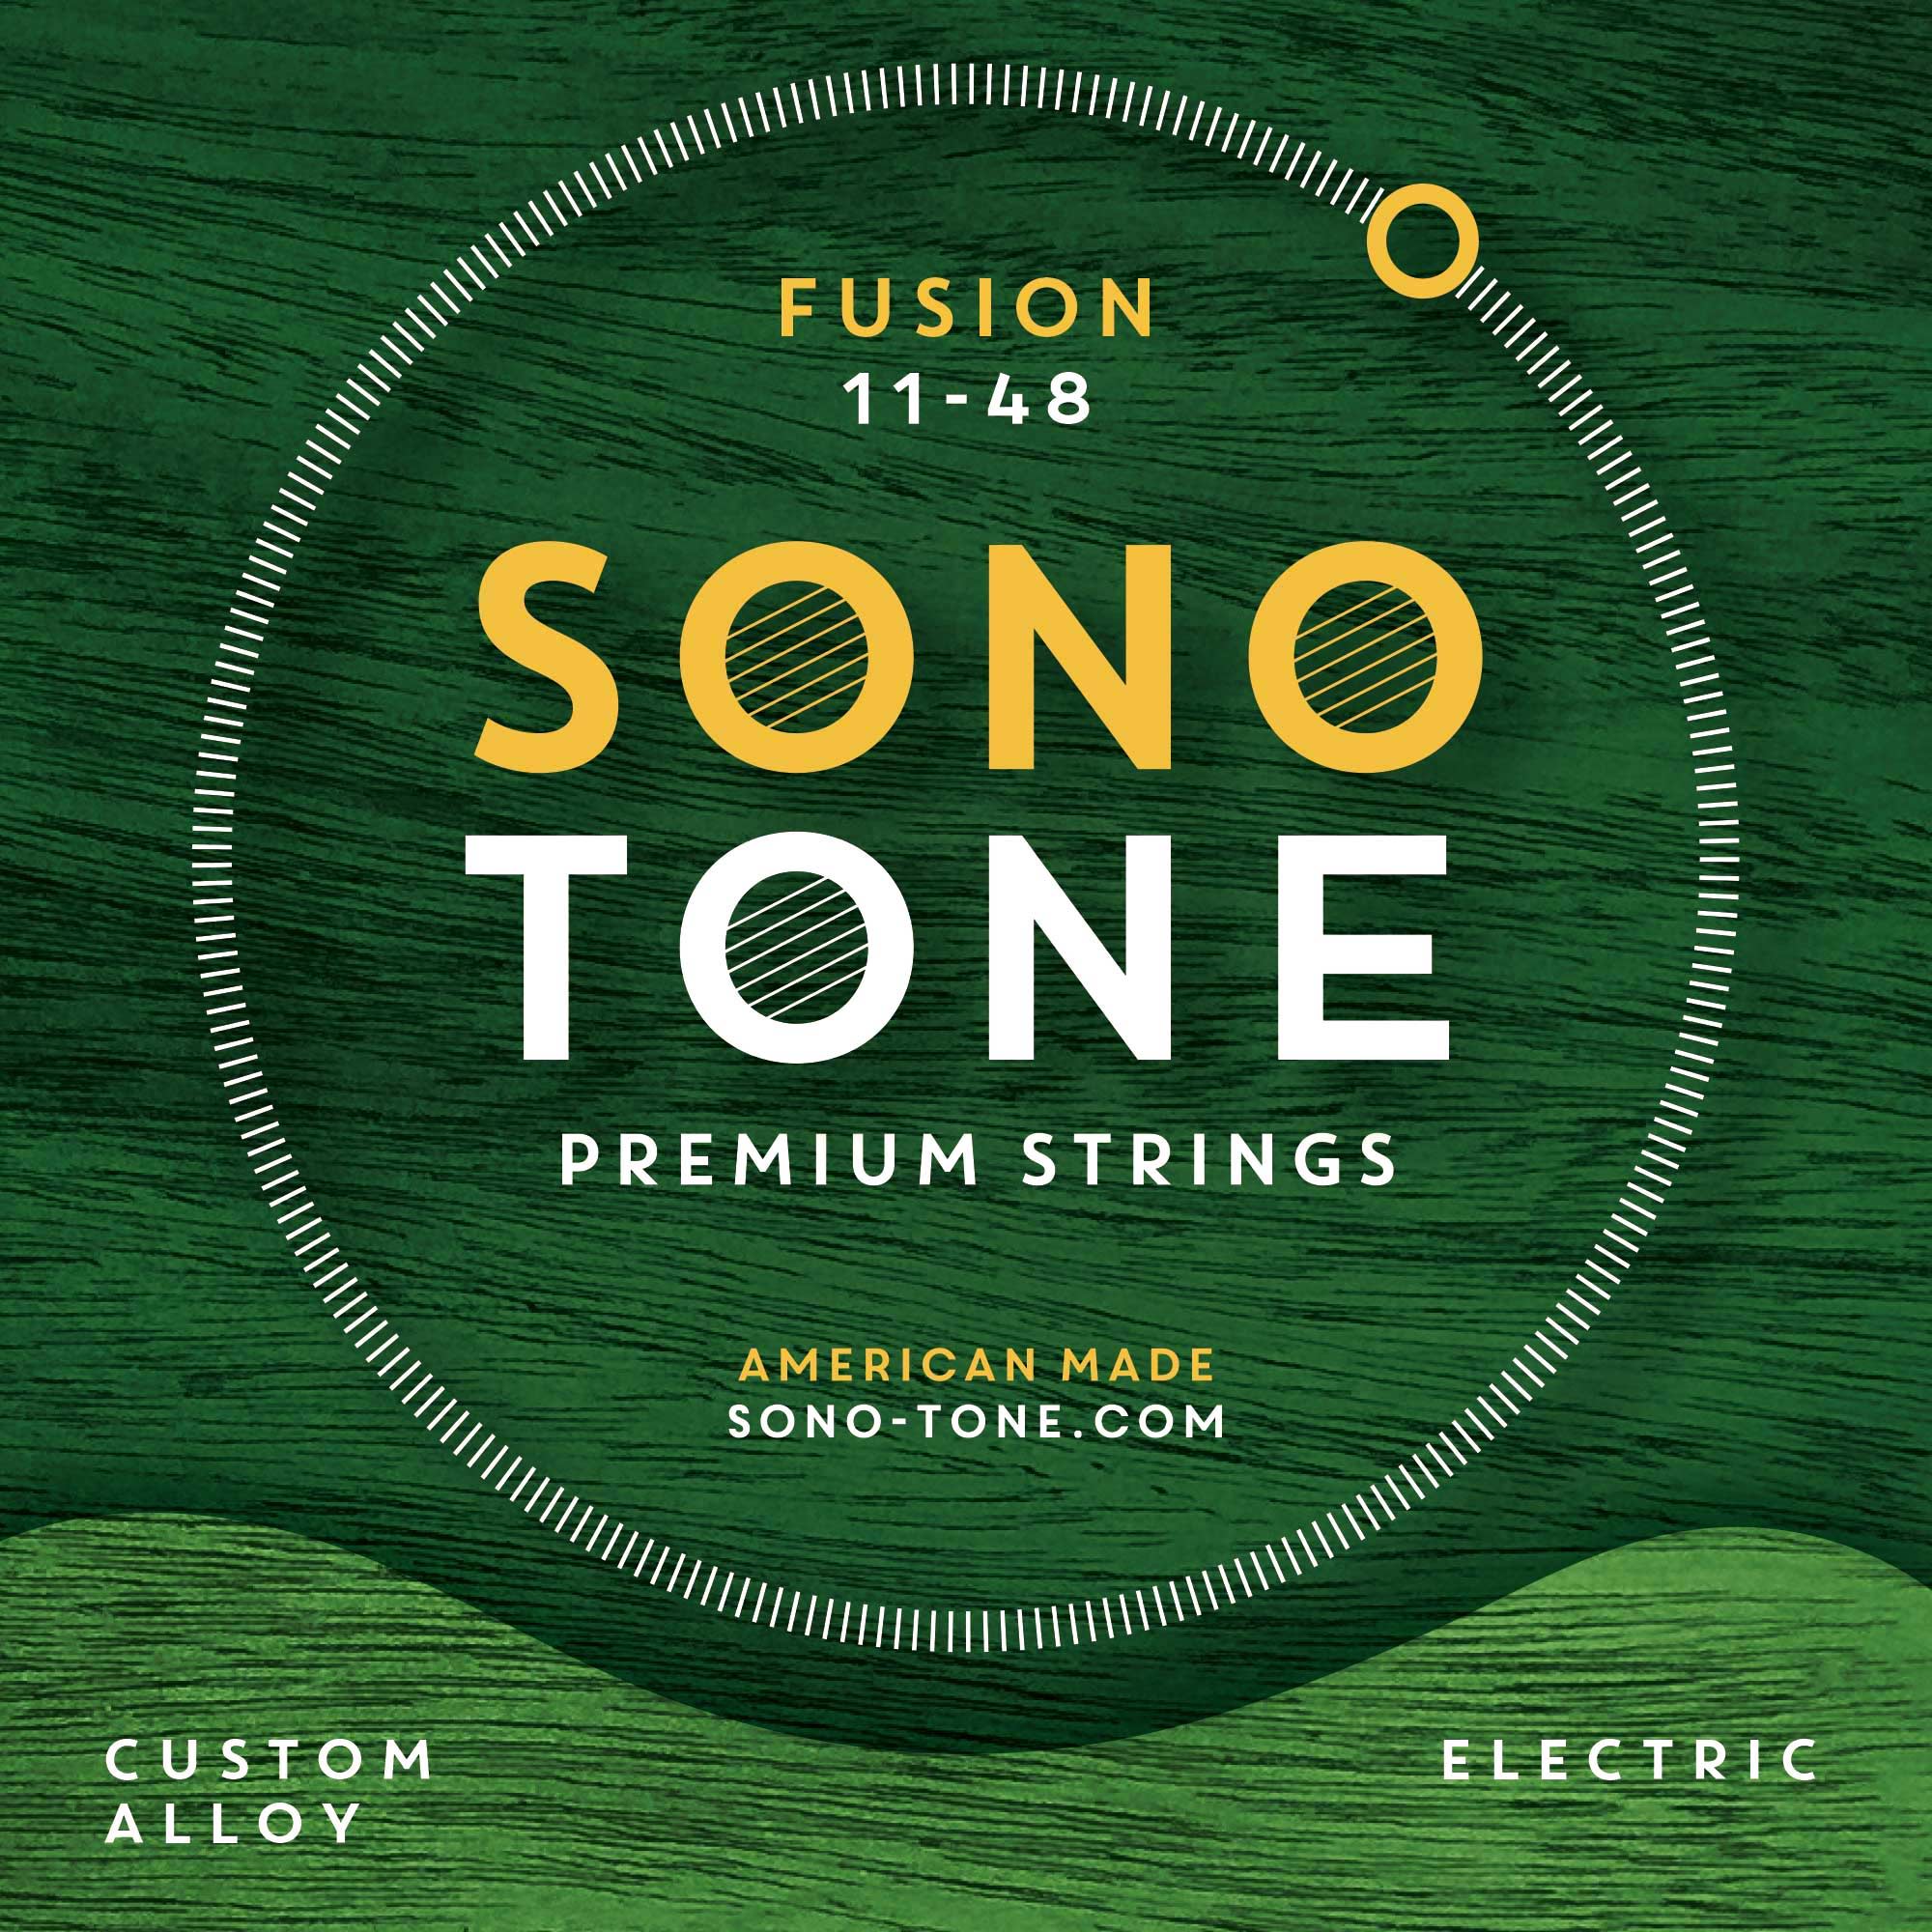 SonoTone Fusion series electric guitar strings are manufactured in the U.S. with high-quality, domestically sourced materials, to enhance tonal clarity, attack and sustain